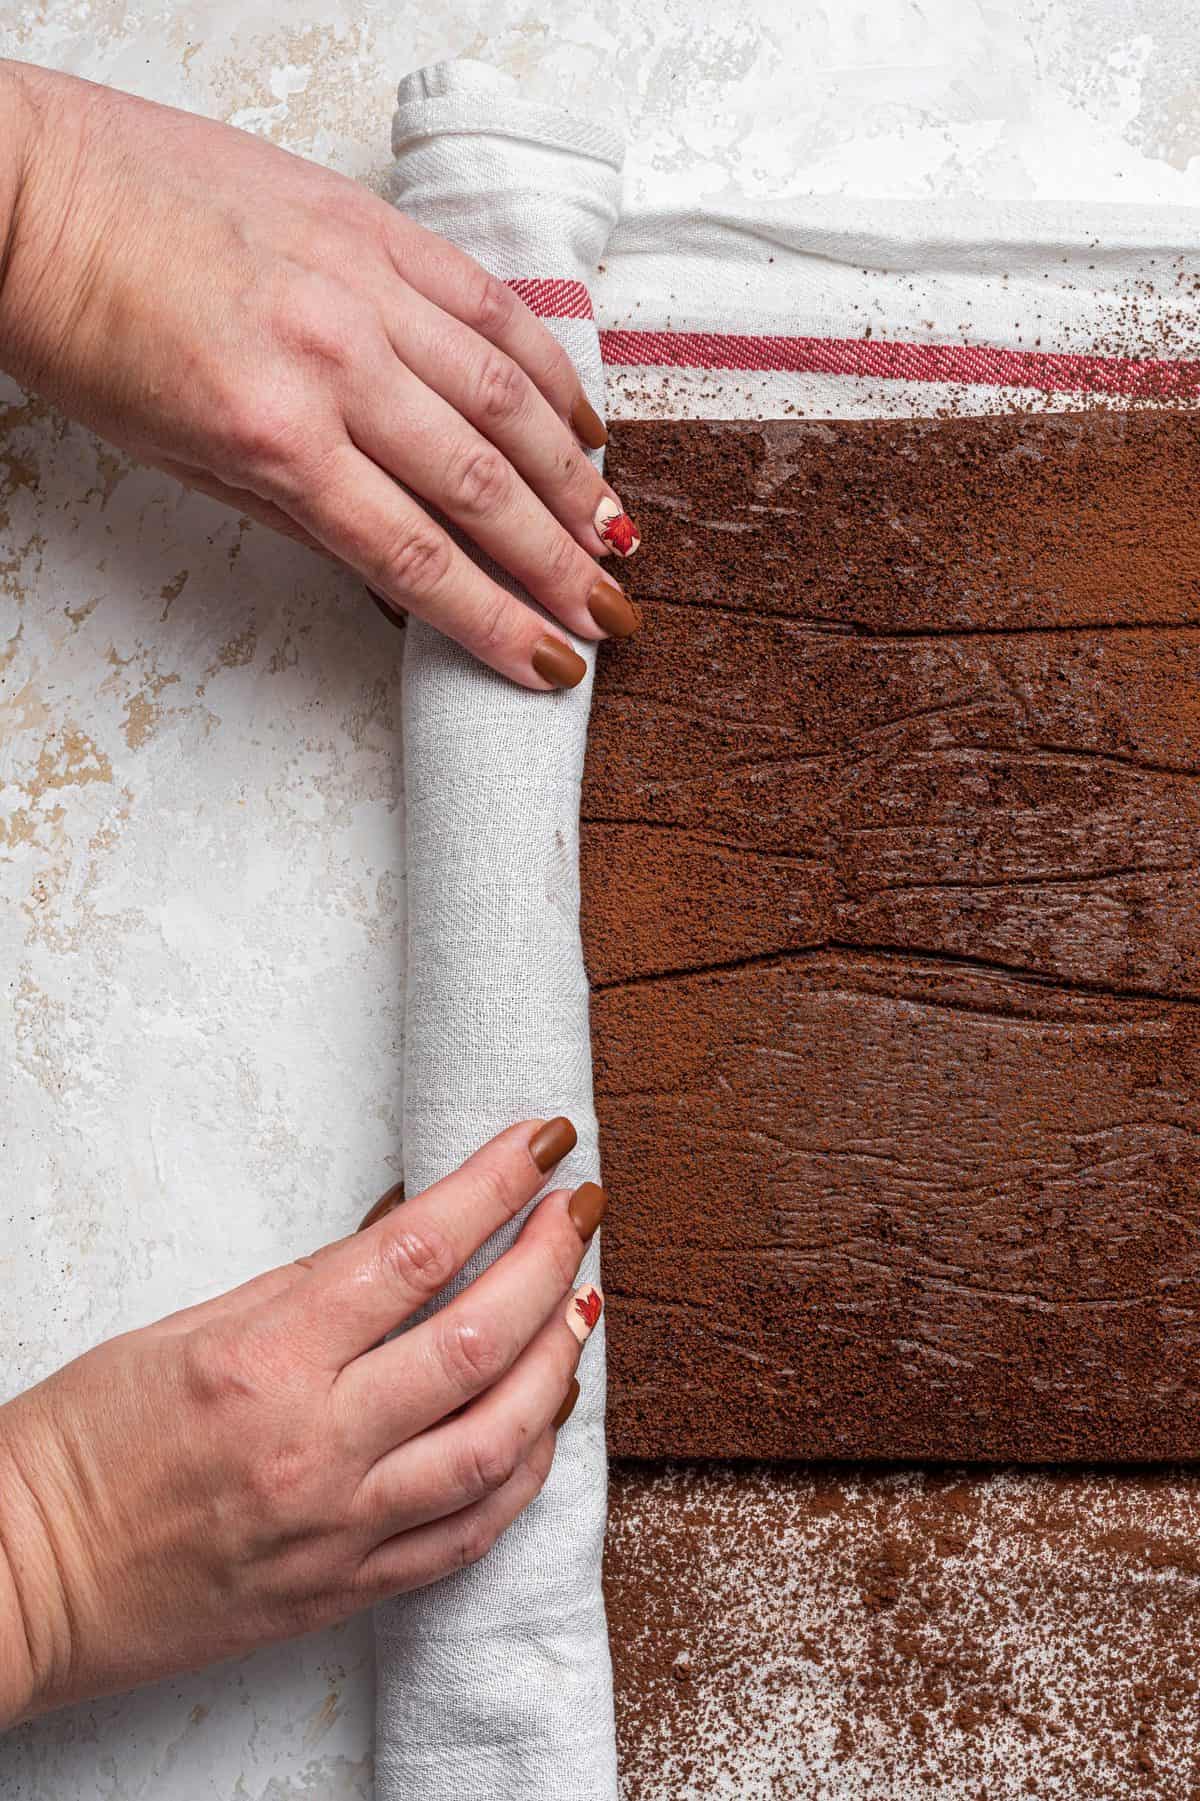 rolling the Yule log cake in a kitchen towel 